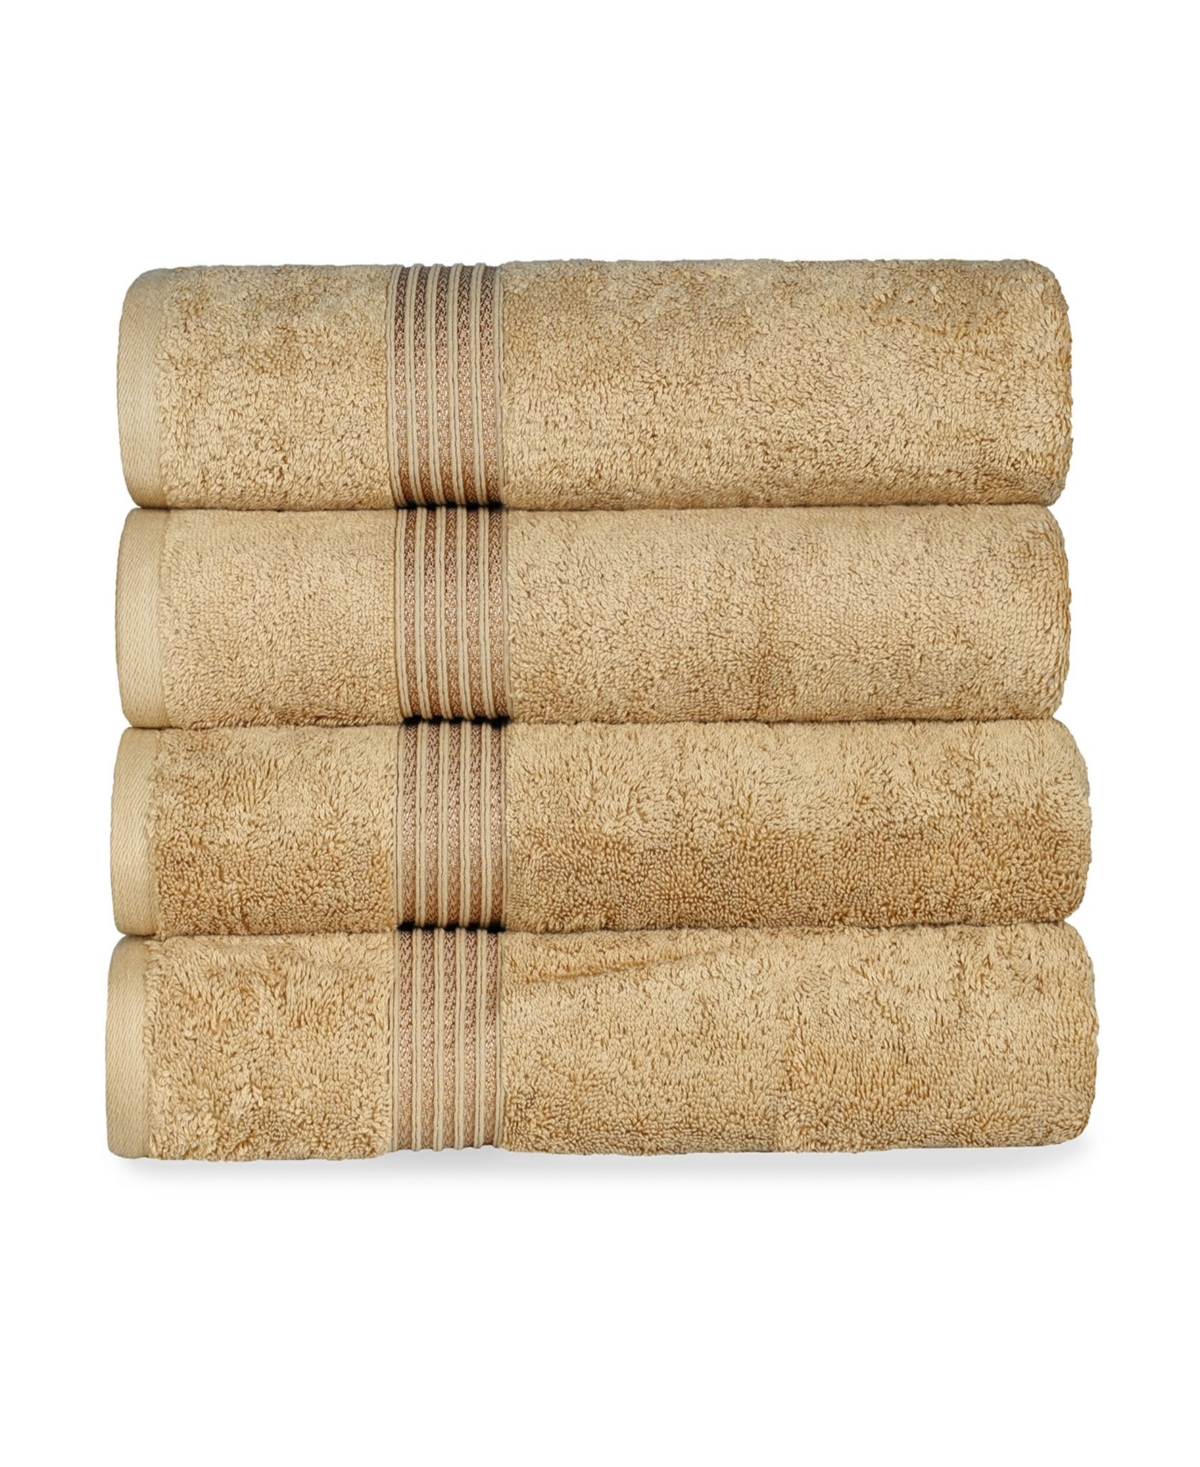 Superior Solid Quick Drying Absorbent 4 Piece Egyptian Cotton Bath Towel Set Bedding In Toast